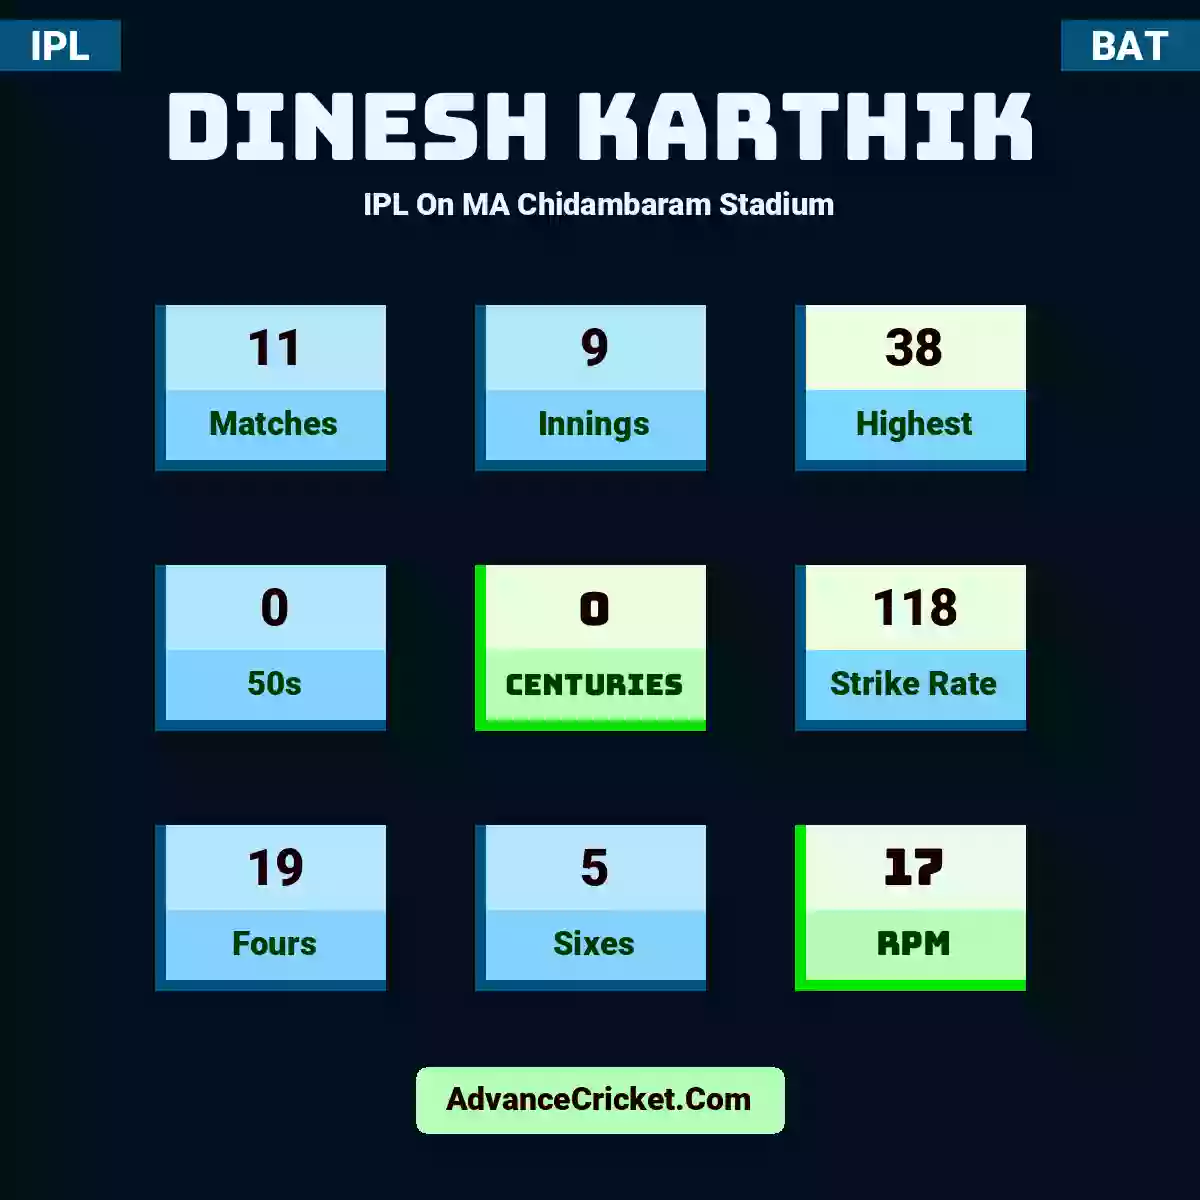 Dinesh Karthik IPL  On MA Chidambaram Stadium, Dinesh Karthik played 11 matches, scored 38 runs as highest, 0 half-centuries, and 0 centuries, with a strike rate of 118. D.Karthik hit 19 fours and 5 sixes, with an RPM of 17.